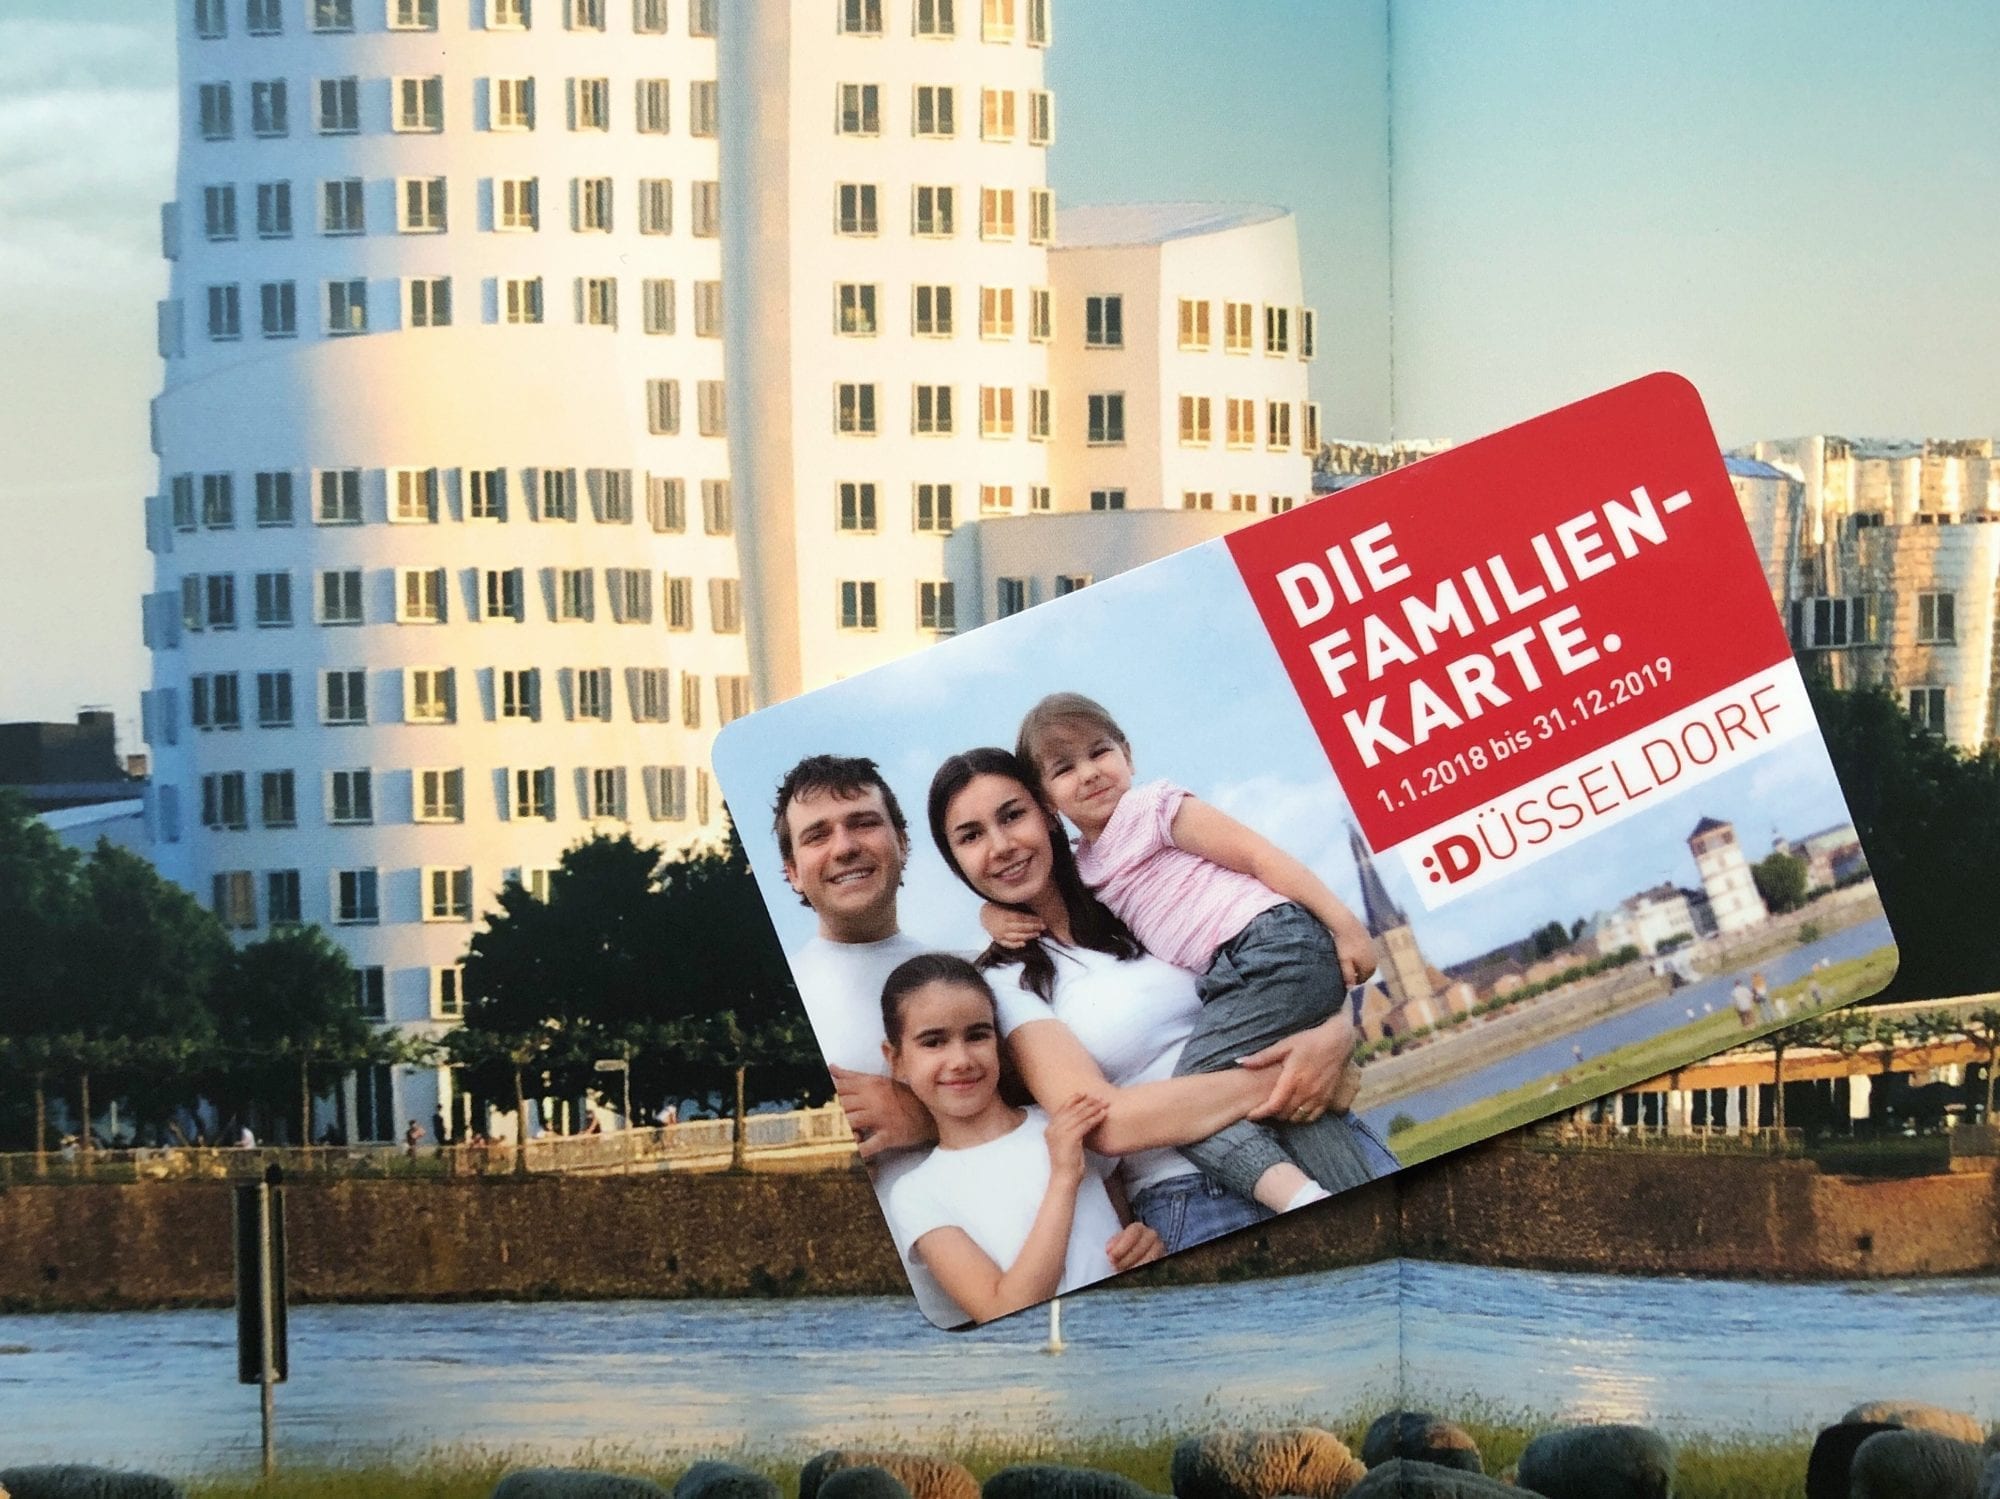 How to Get The Düsseldorf Family Card for Free